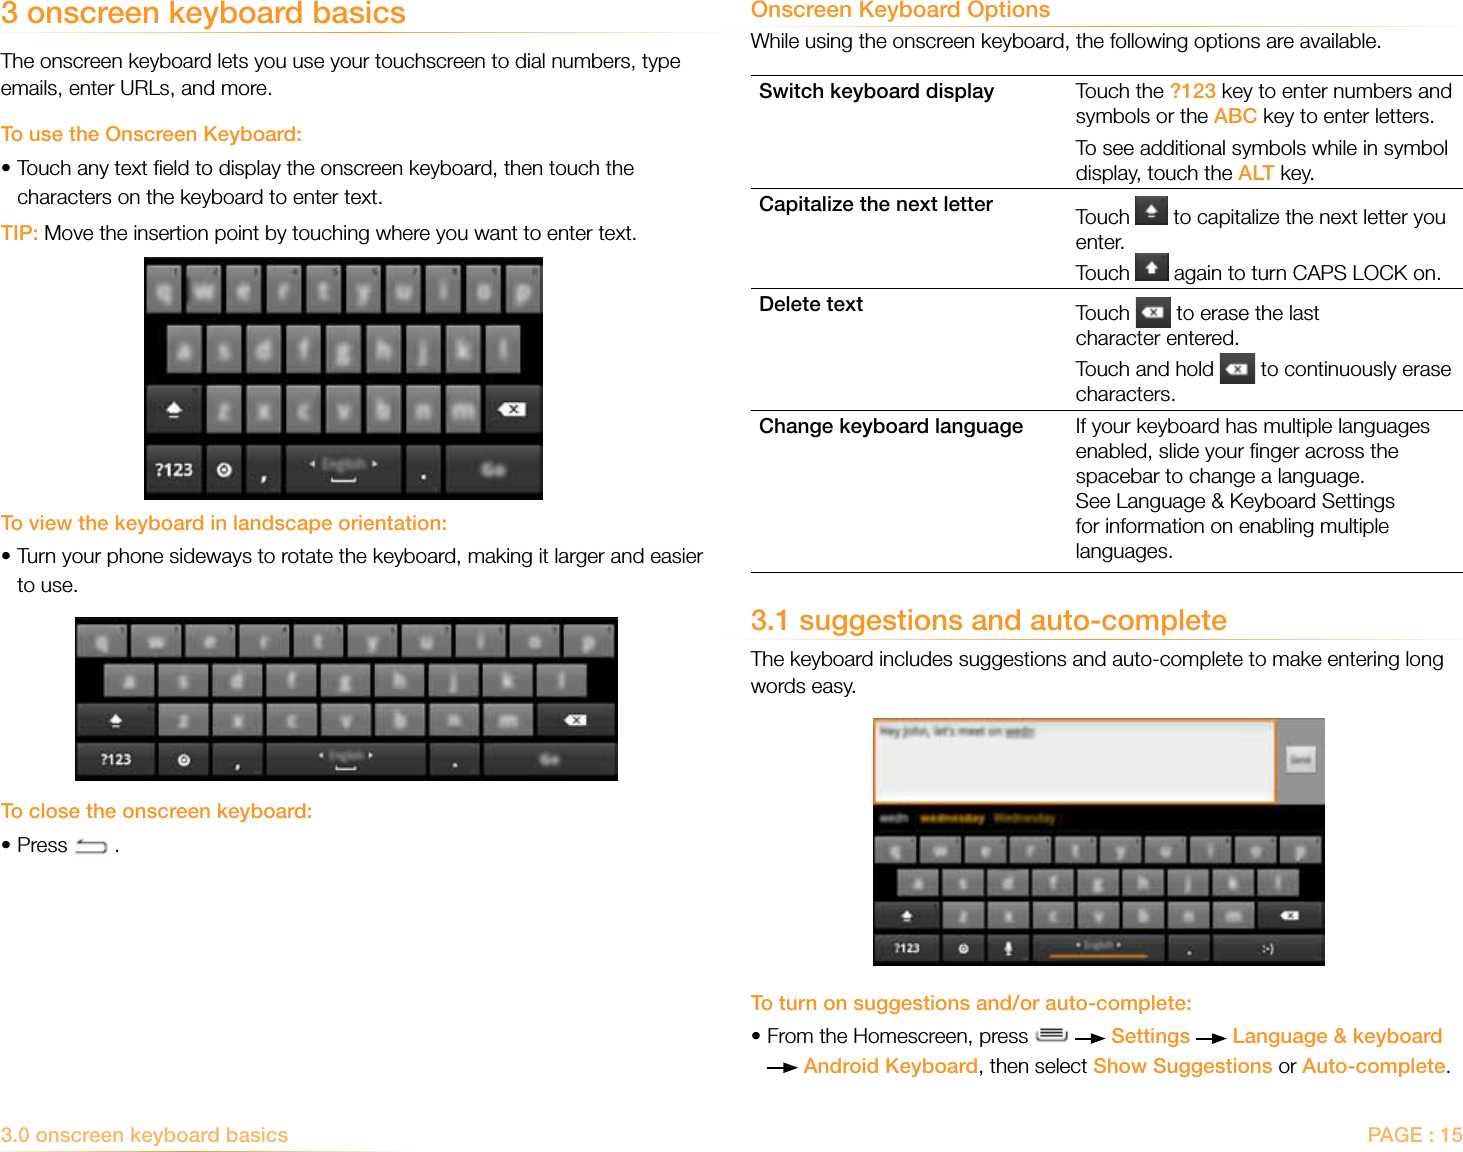 PAGE : 153.0 onscreen keyboard basicsOnscreen Keyboard OptionsWhile using the onscreen keyboard, the following options are available.Switch keyboard display Touch the ?123 key to enter numbers and symbols or the ABC key to enter letters.To see additional symbols while in symbol display, touch the ALT key.Capitalize the next letter Touch   to capitalize the next letter you enter. Touch   again to turn CAPS LOCK on.Delete text Touch   to erase the last character entered.Touch and hold   to continuously erase characters.Change keyboard language If your keyboard has multiple languages enabled, slide your ﬁnger across the spacebar to change a language. See Language &amp; Keyboard Settings for information on enabling multiple languages.3.1 suggestions and auto-completeThe keyboard includes suggestions and auto-complete to make entering long words easy. To turn on suggestions and/or auto-complete:• From the Homescreen, press     Settings   Language &amp; keyboard  Android Keyboard, then select Show Suggestions or Auto-complete.3 onscreen keyboard basicsThe onscreen keyboard lets you use your touchscreen to dial numbers, type emails, enter URLs, and more.To use the Onscreen Keyboard:• Touch any text ﬁeld to display the onscreen keyboard, then touch the characters on the keyboard to enter text. TIP: Move the insertion point by touching where you want to enter text.To view the keyboard in landscape orientation:• Turn your phone sideways to rotate the keyboard, making it larger and easier to use.To close the onscreen keyboard:•Press   .